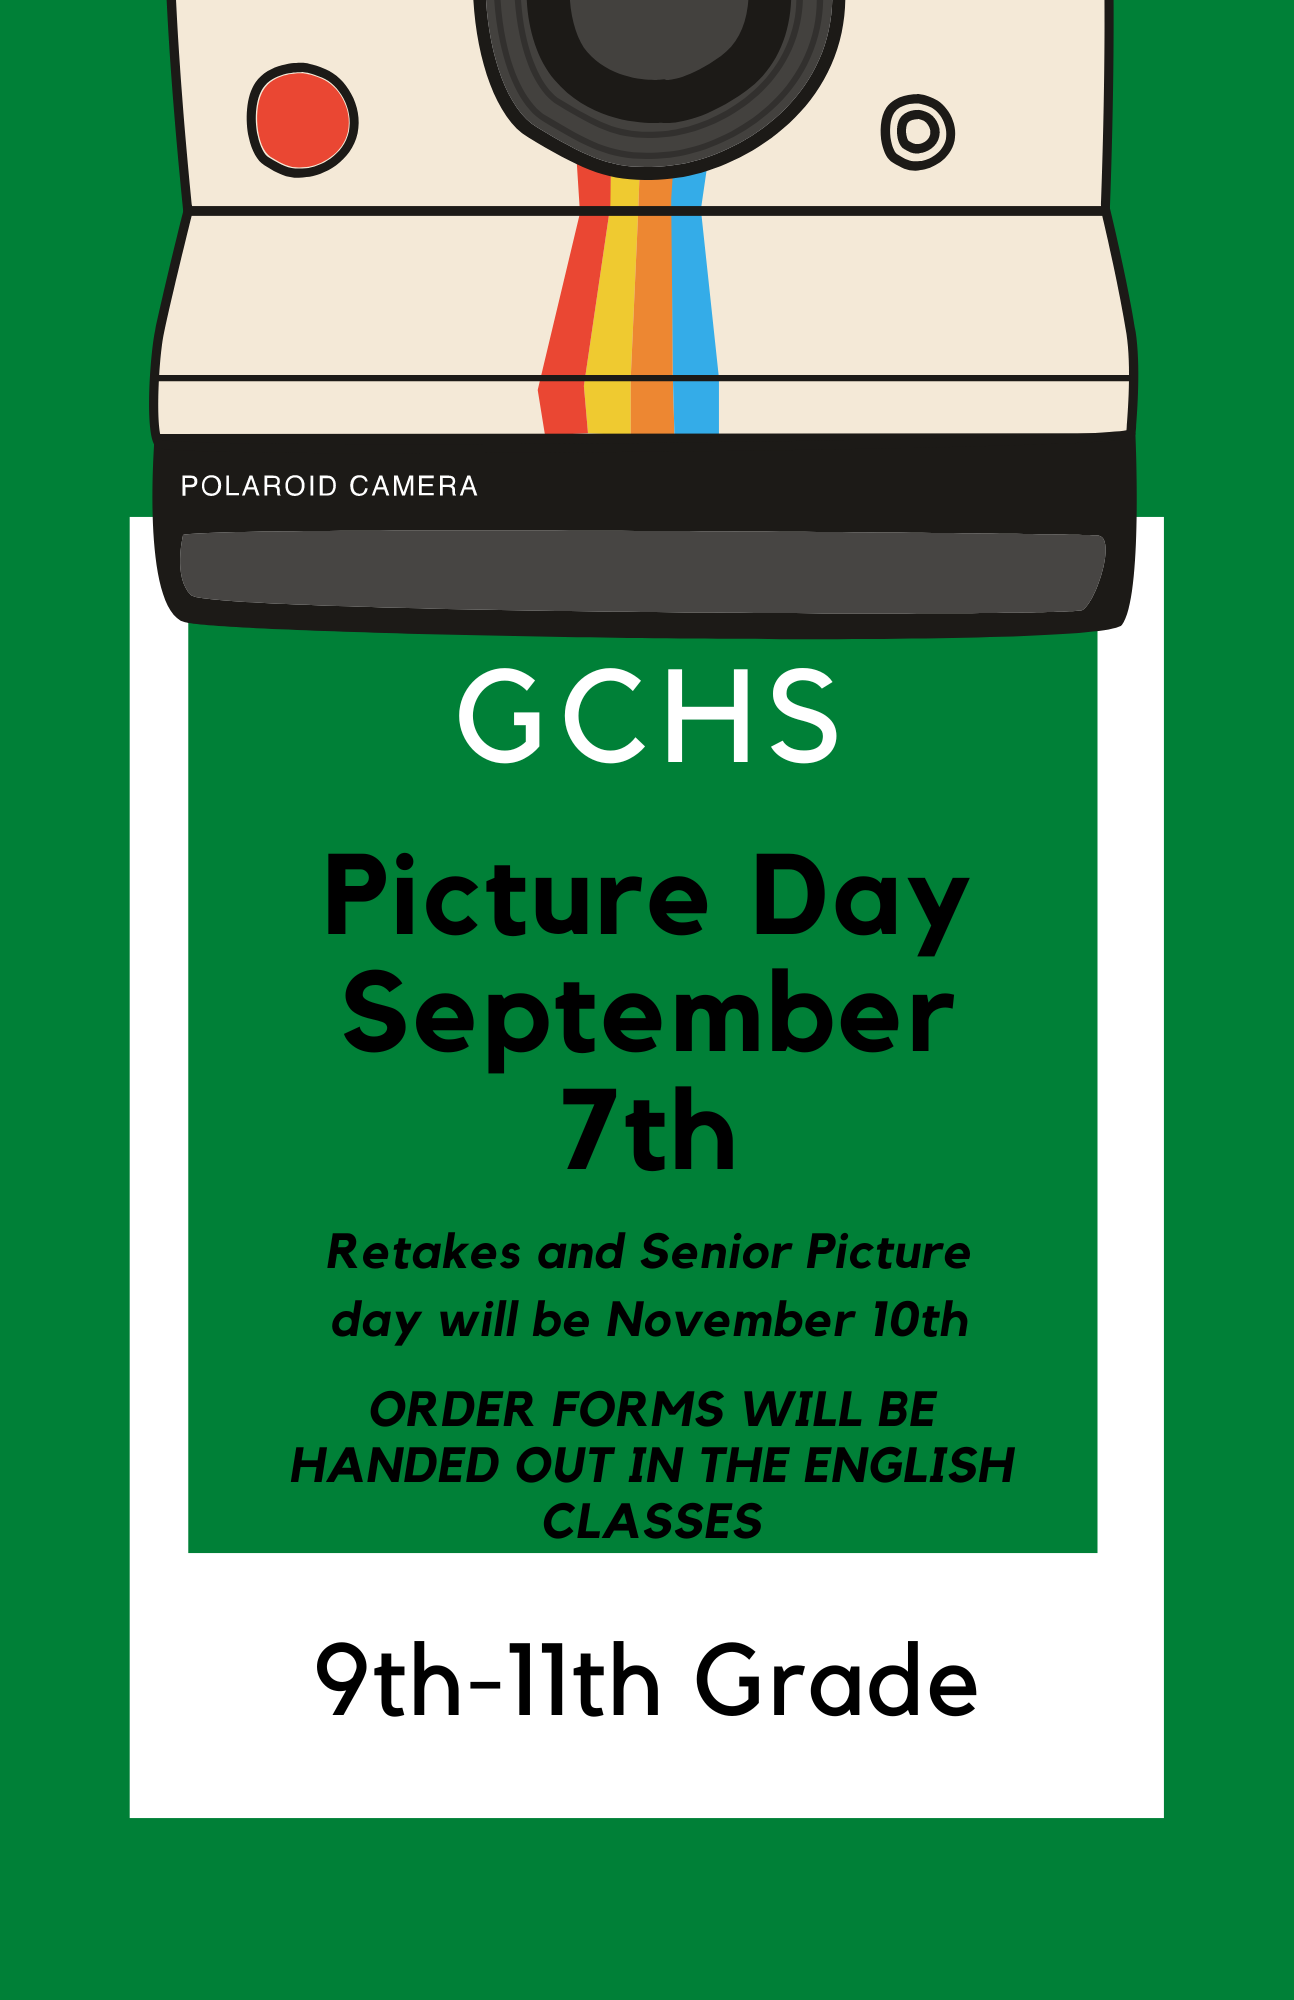 Picture day is September 7th. See the image for more details. 